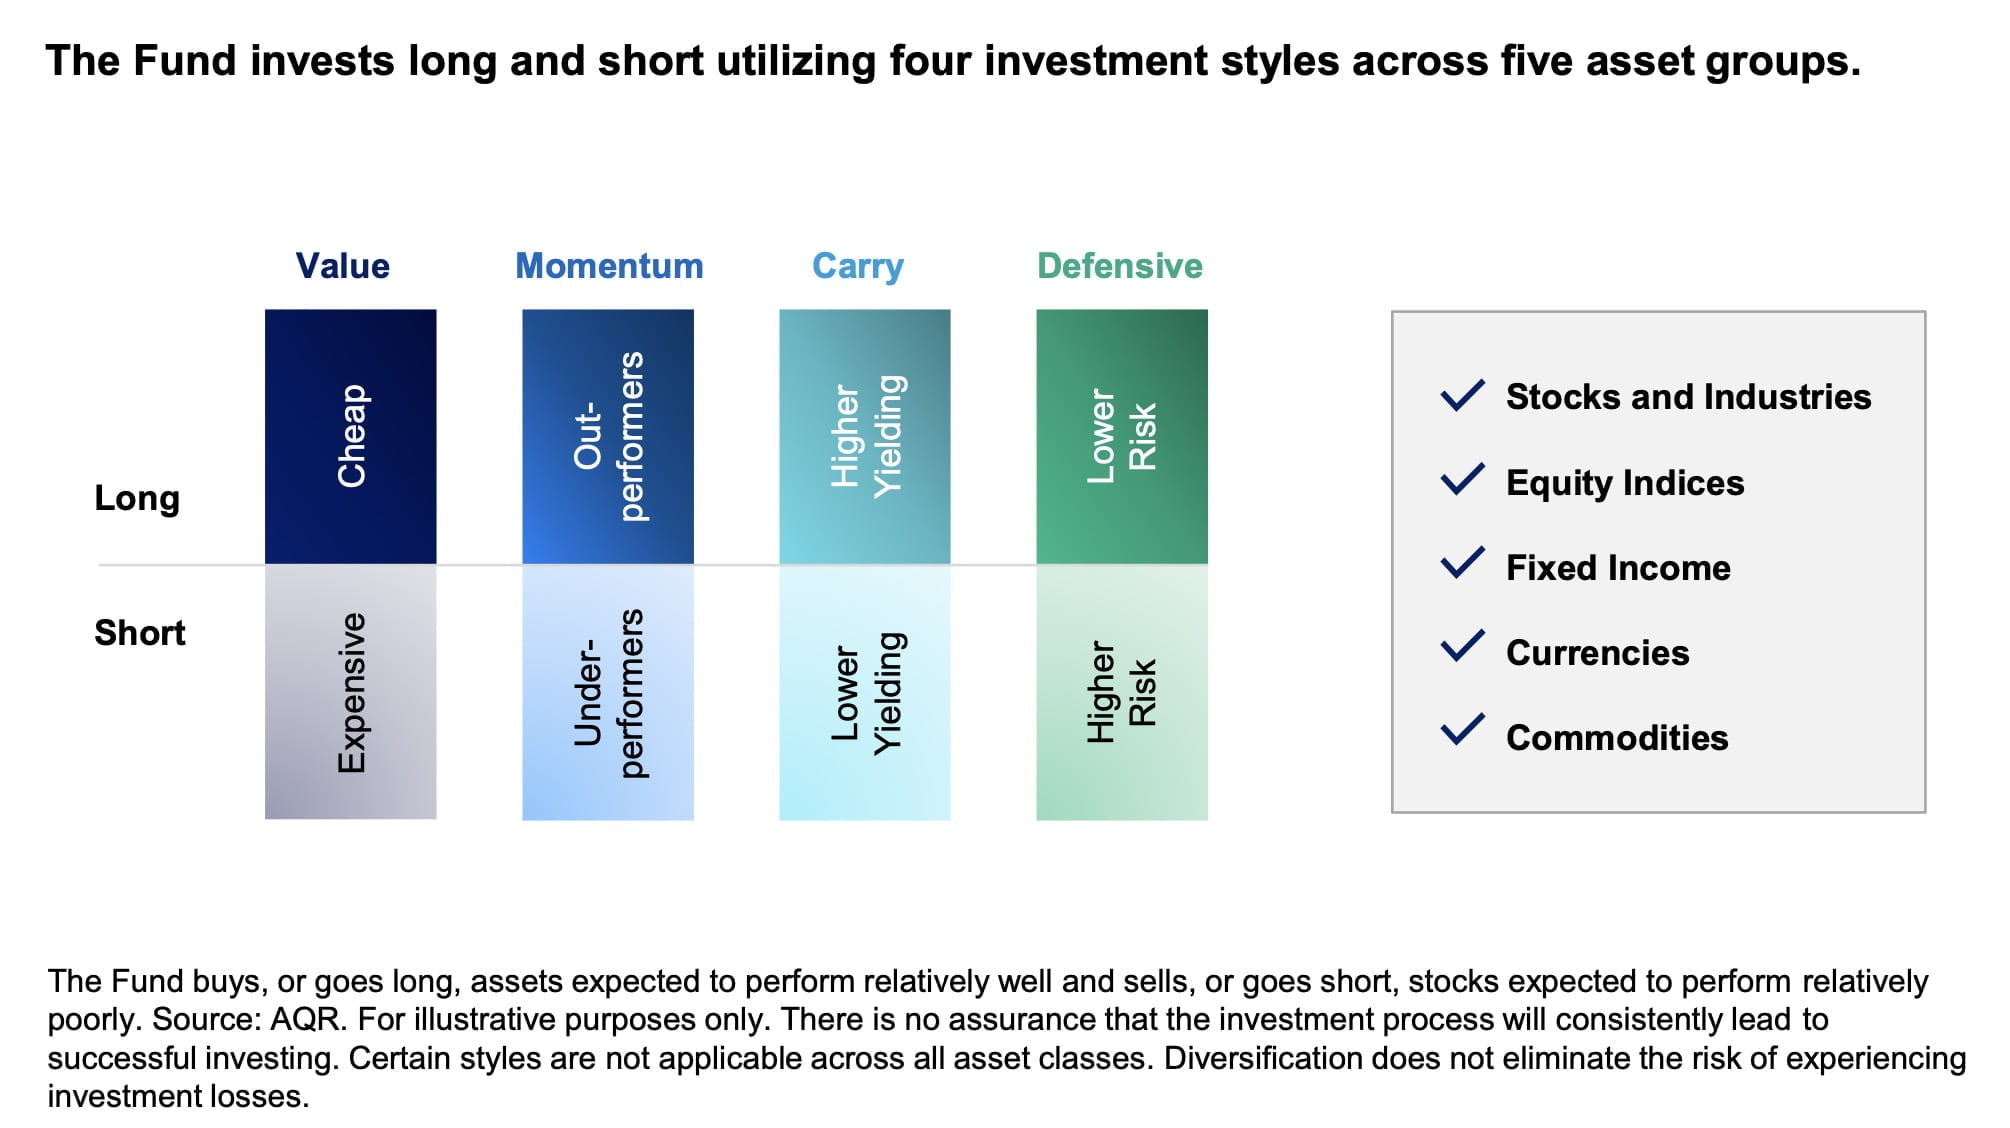 AQR Style Premia Strategies - Value, Momentum, Carry, Defensive